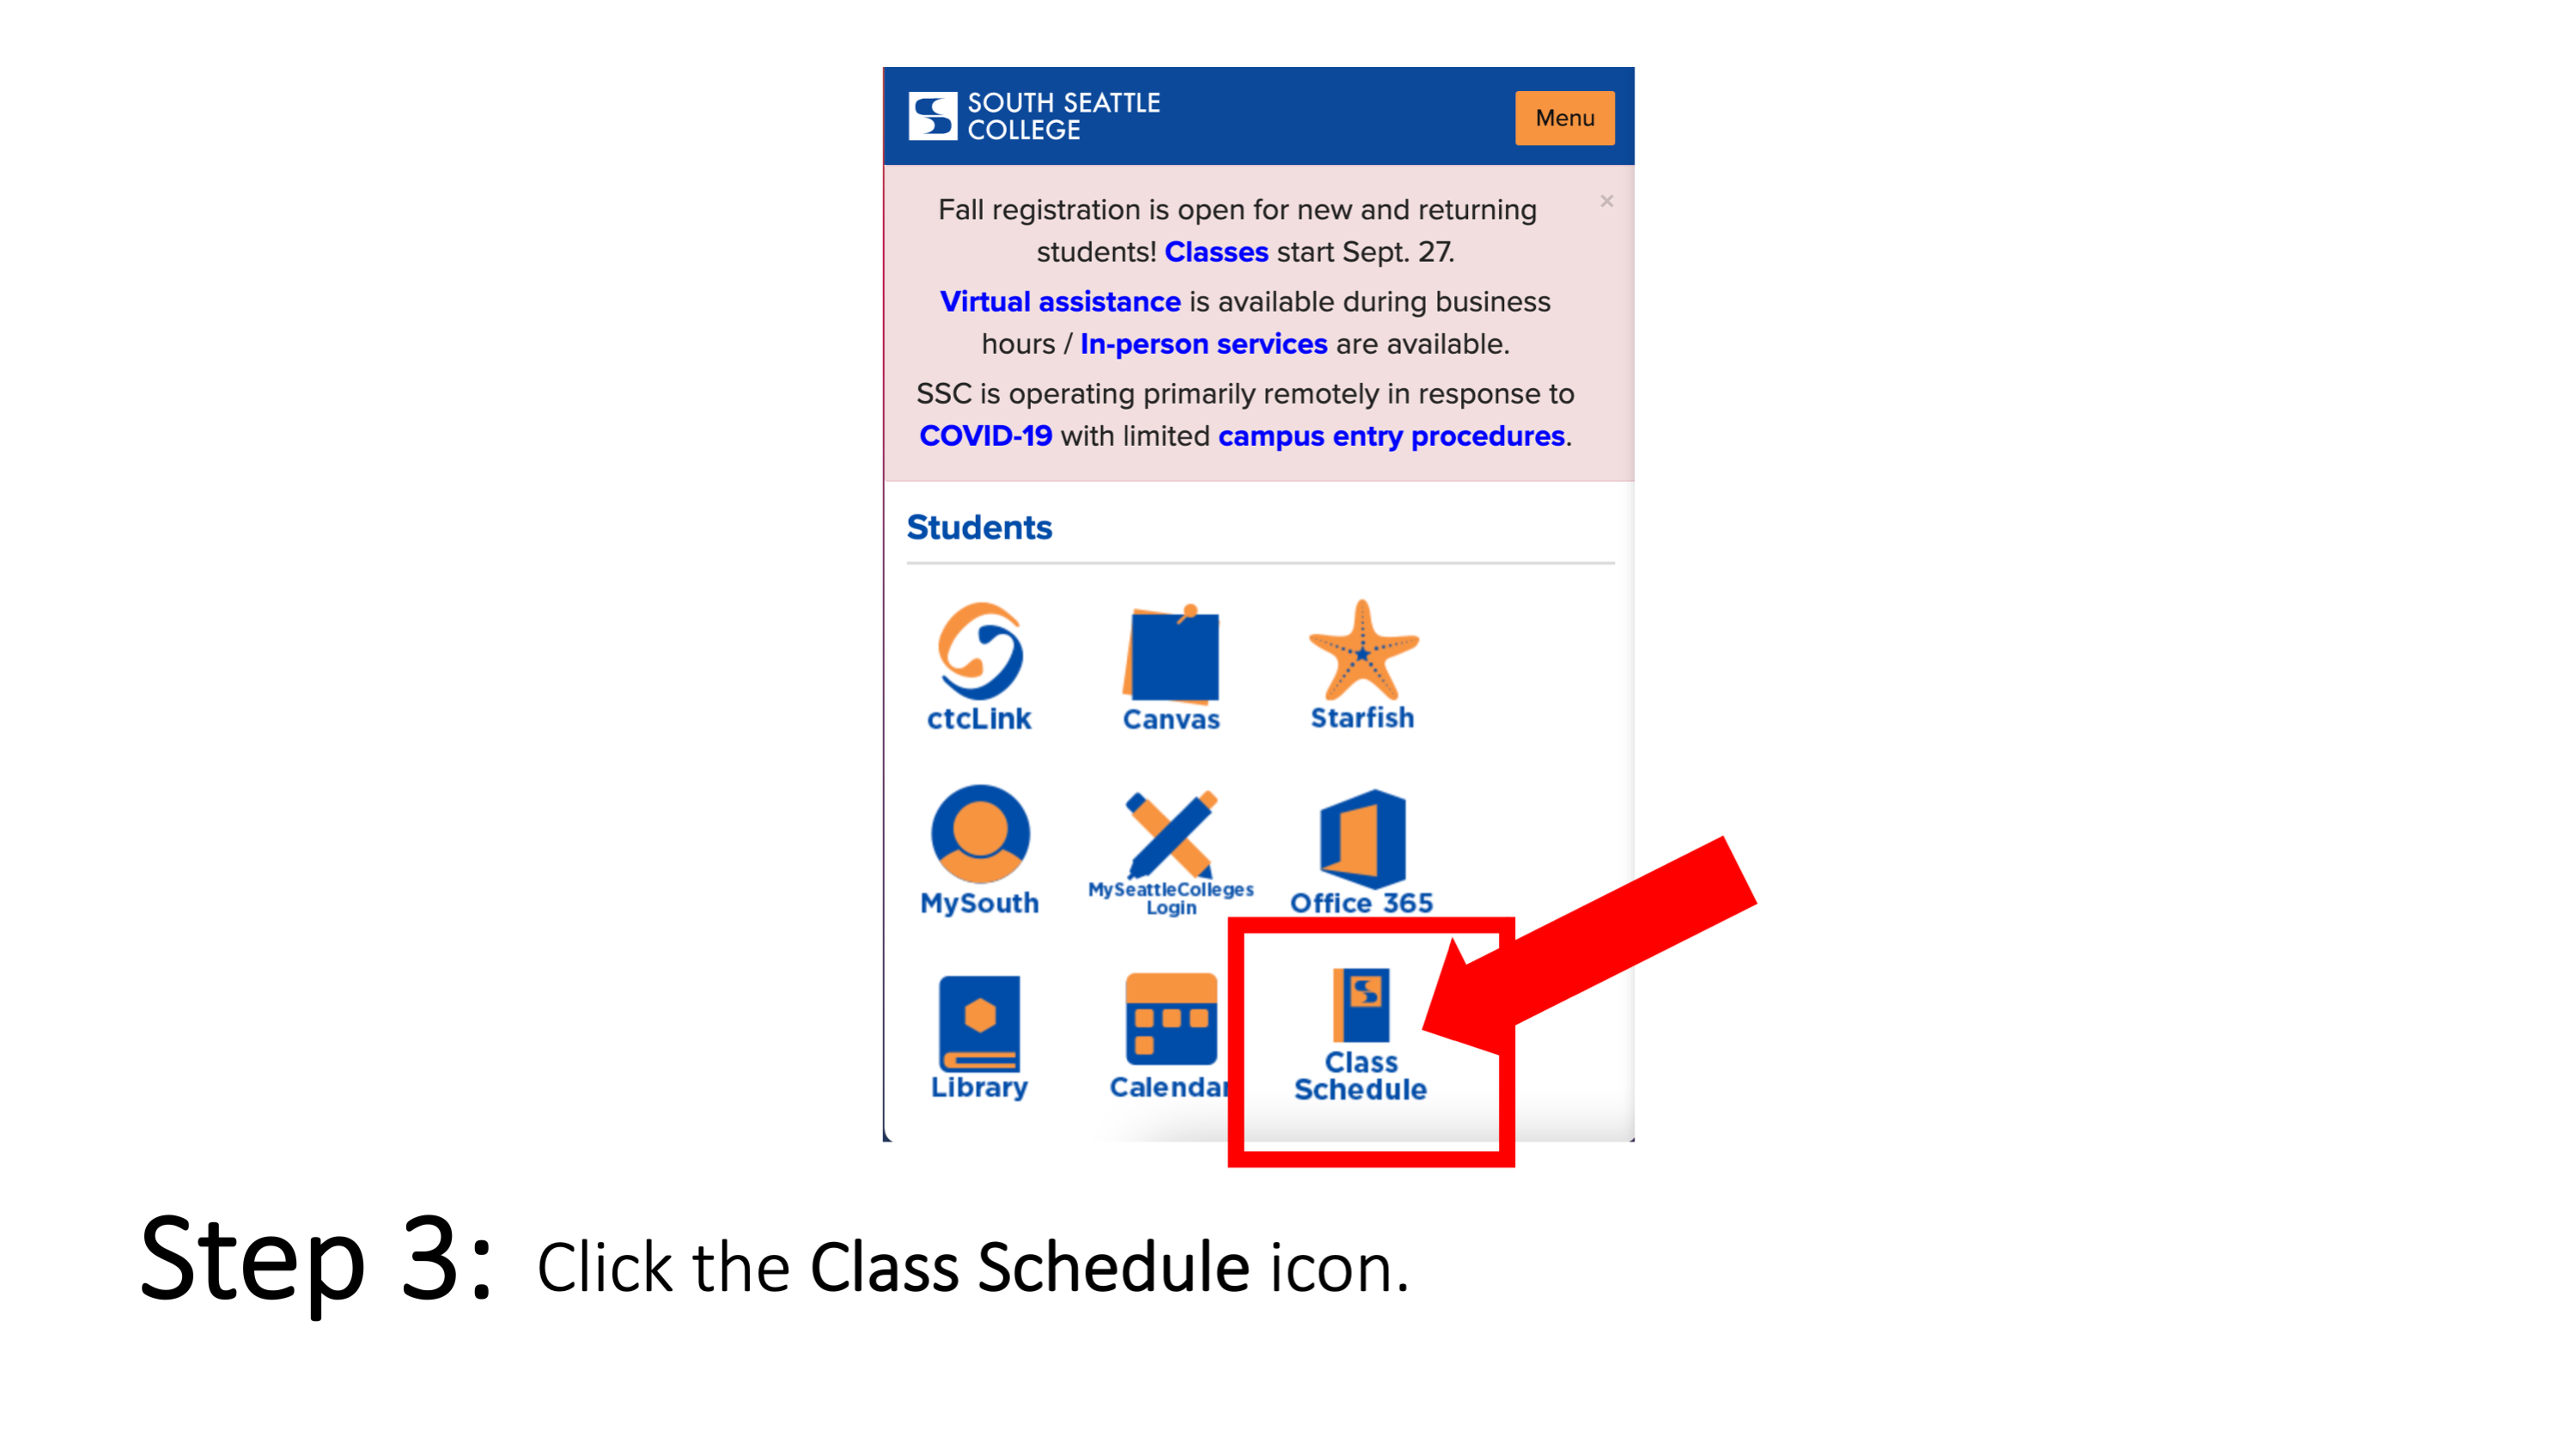 Step 3: Click the Class Schedule icon.